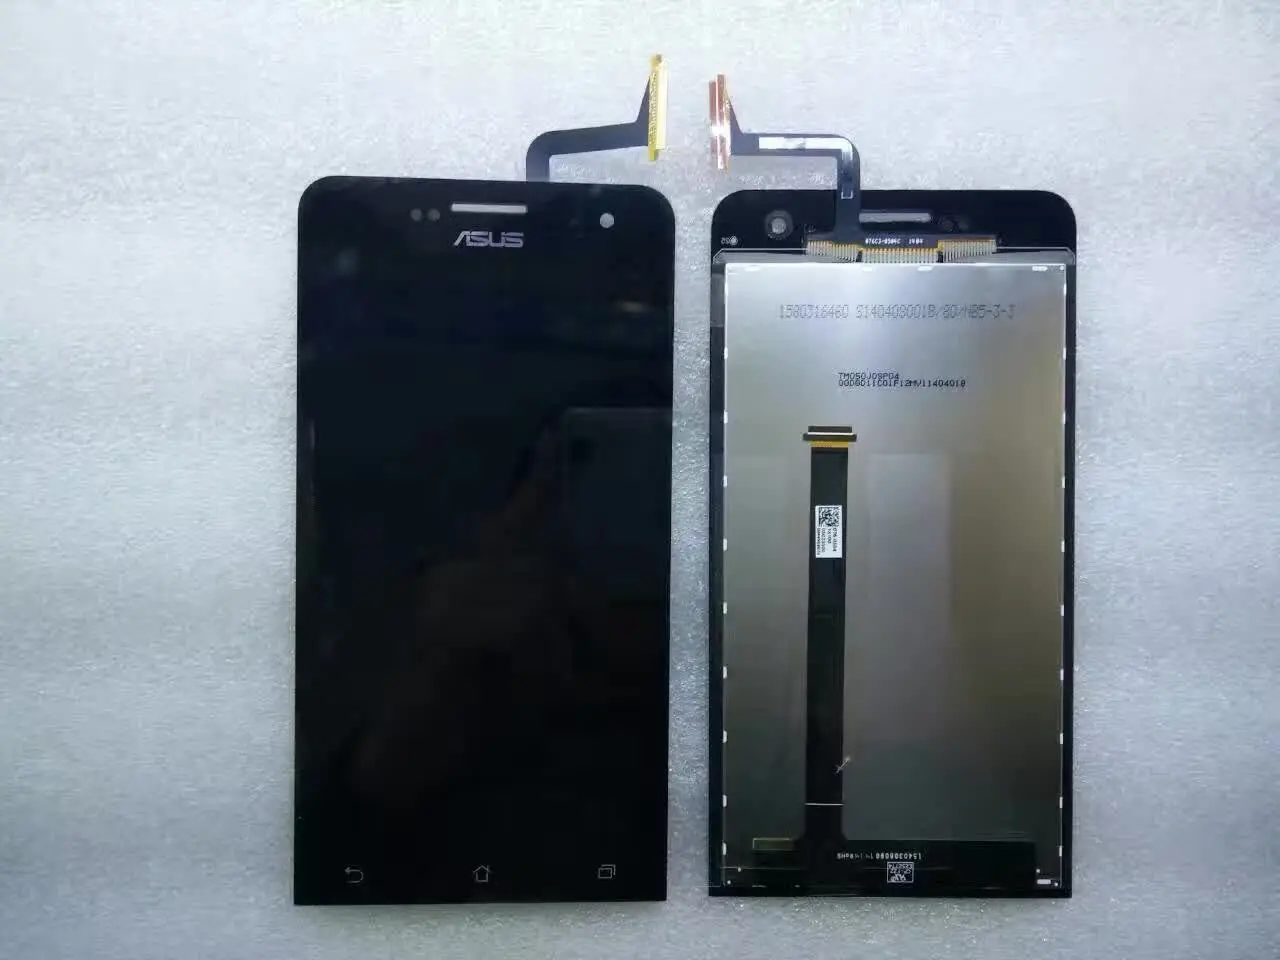 

New Original Mobile Phone LCD Display Digitizer Touch screen Assembly For Asus zenfone 5 A500CG A501CG T00J T00F +free shipping